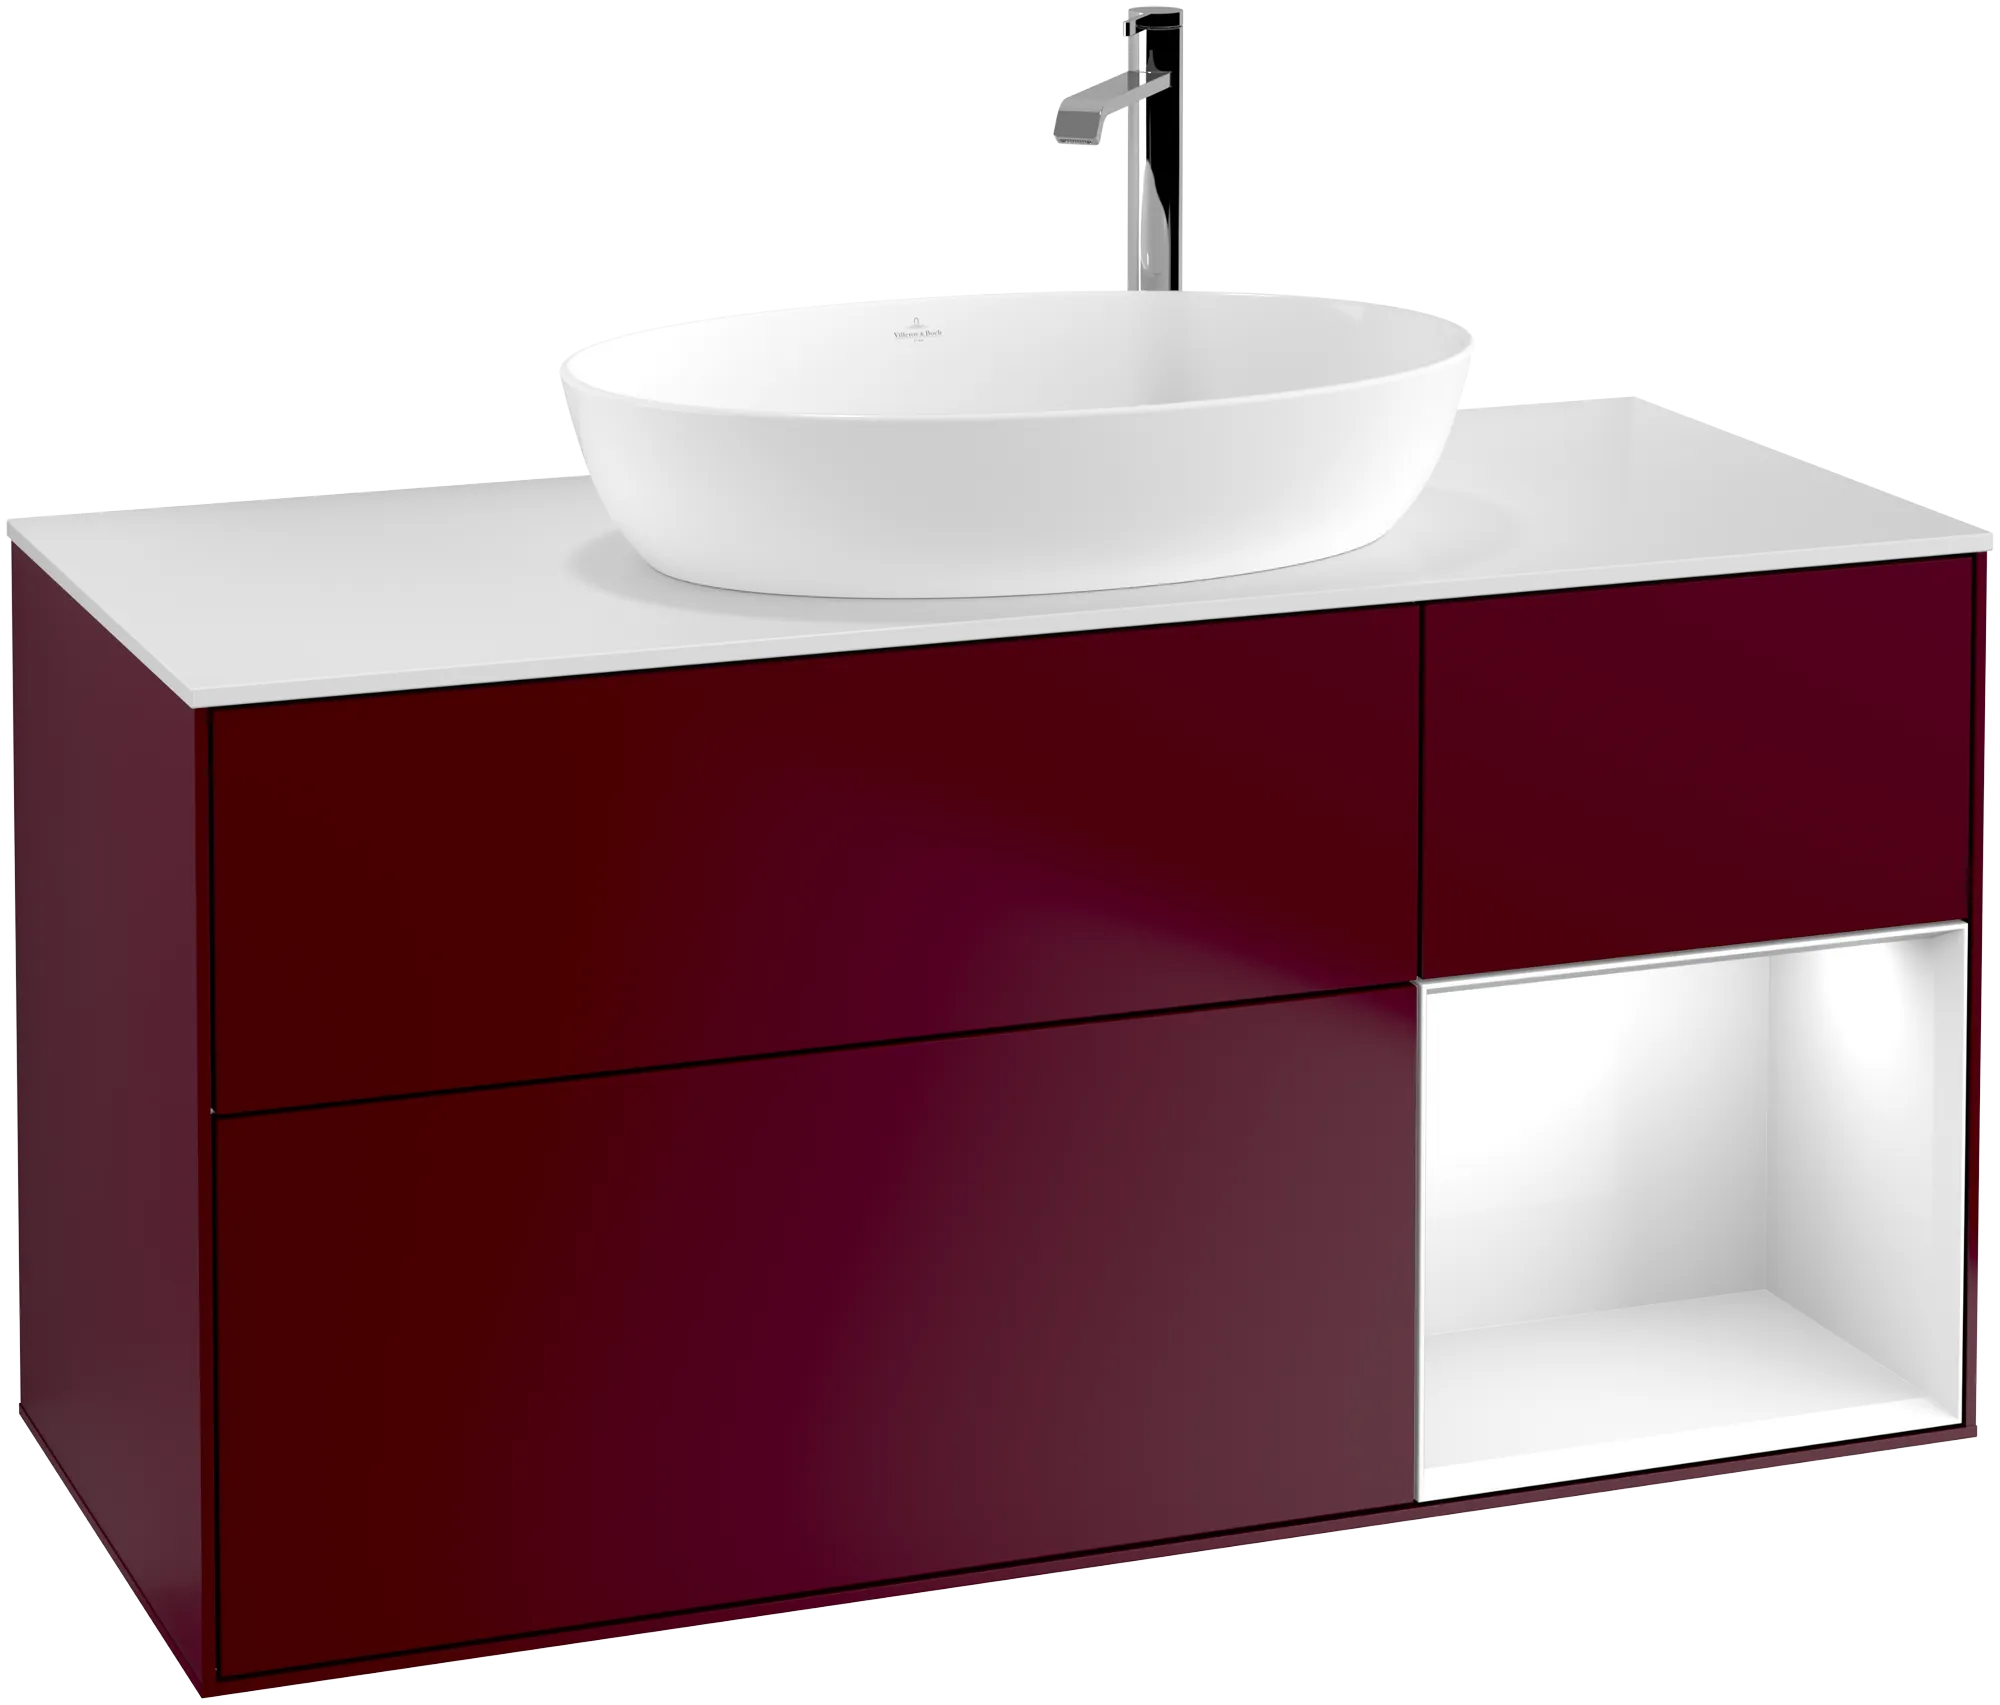 Picture of VILLEROY BOCH Finion Vanity unit, with lighting, 3 pull-out compartments, 1200 x 603 x 501 mm, Peony Matt Lacquer / Glossy White Lacquer / Glass White Matt #G951GFHB